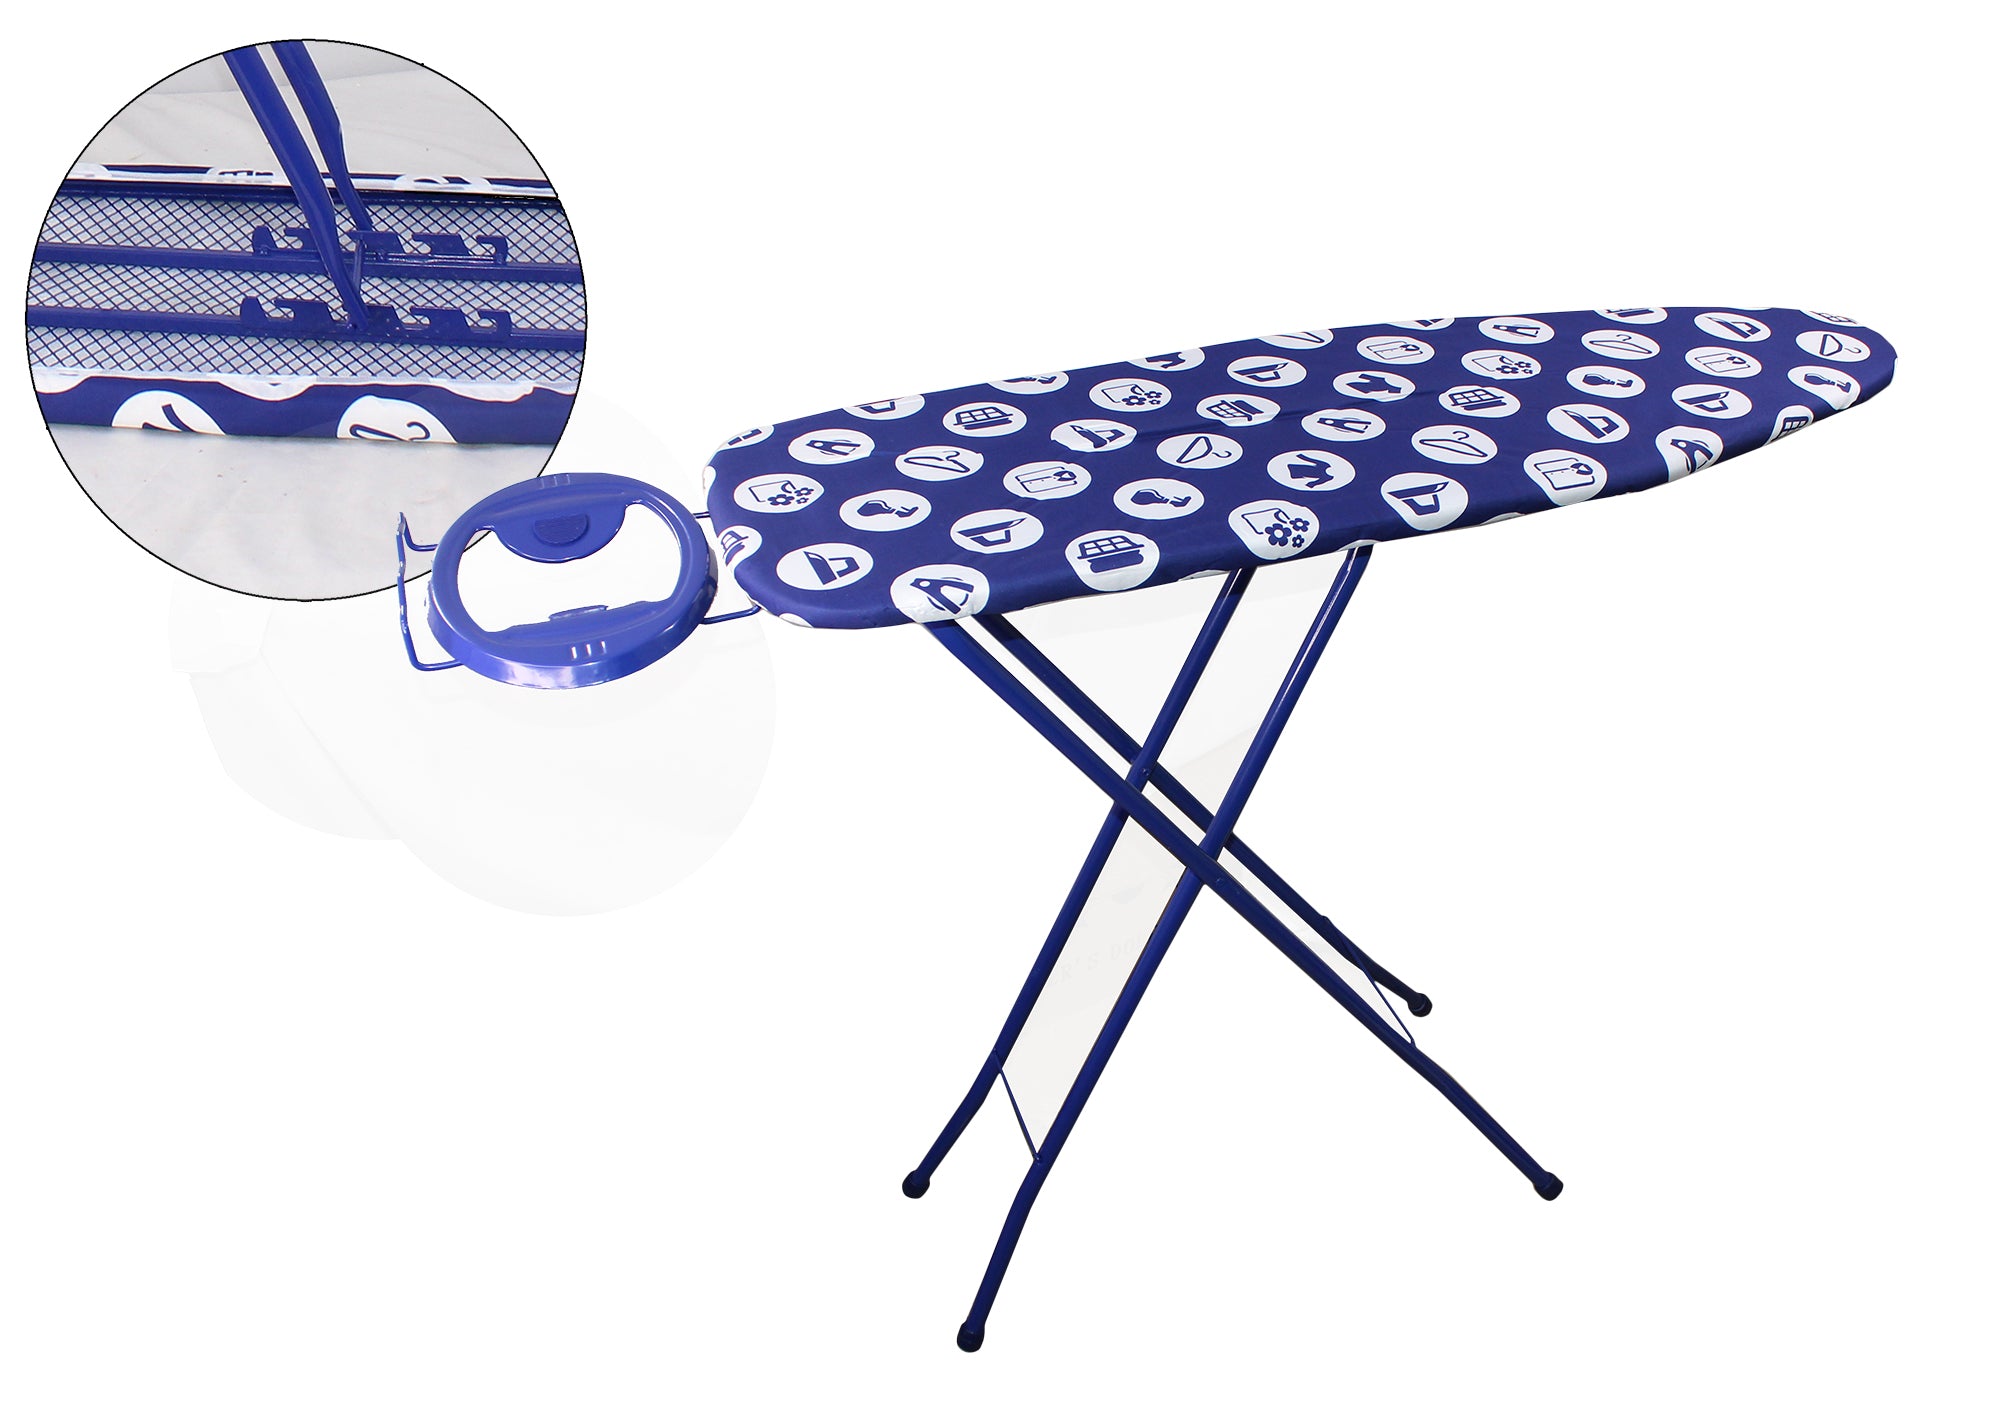 130x34cm Adjustable 4 Leg Ironing Board - with Iron Rest & Steel Mesh Top